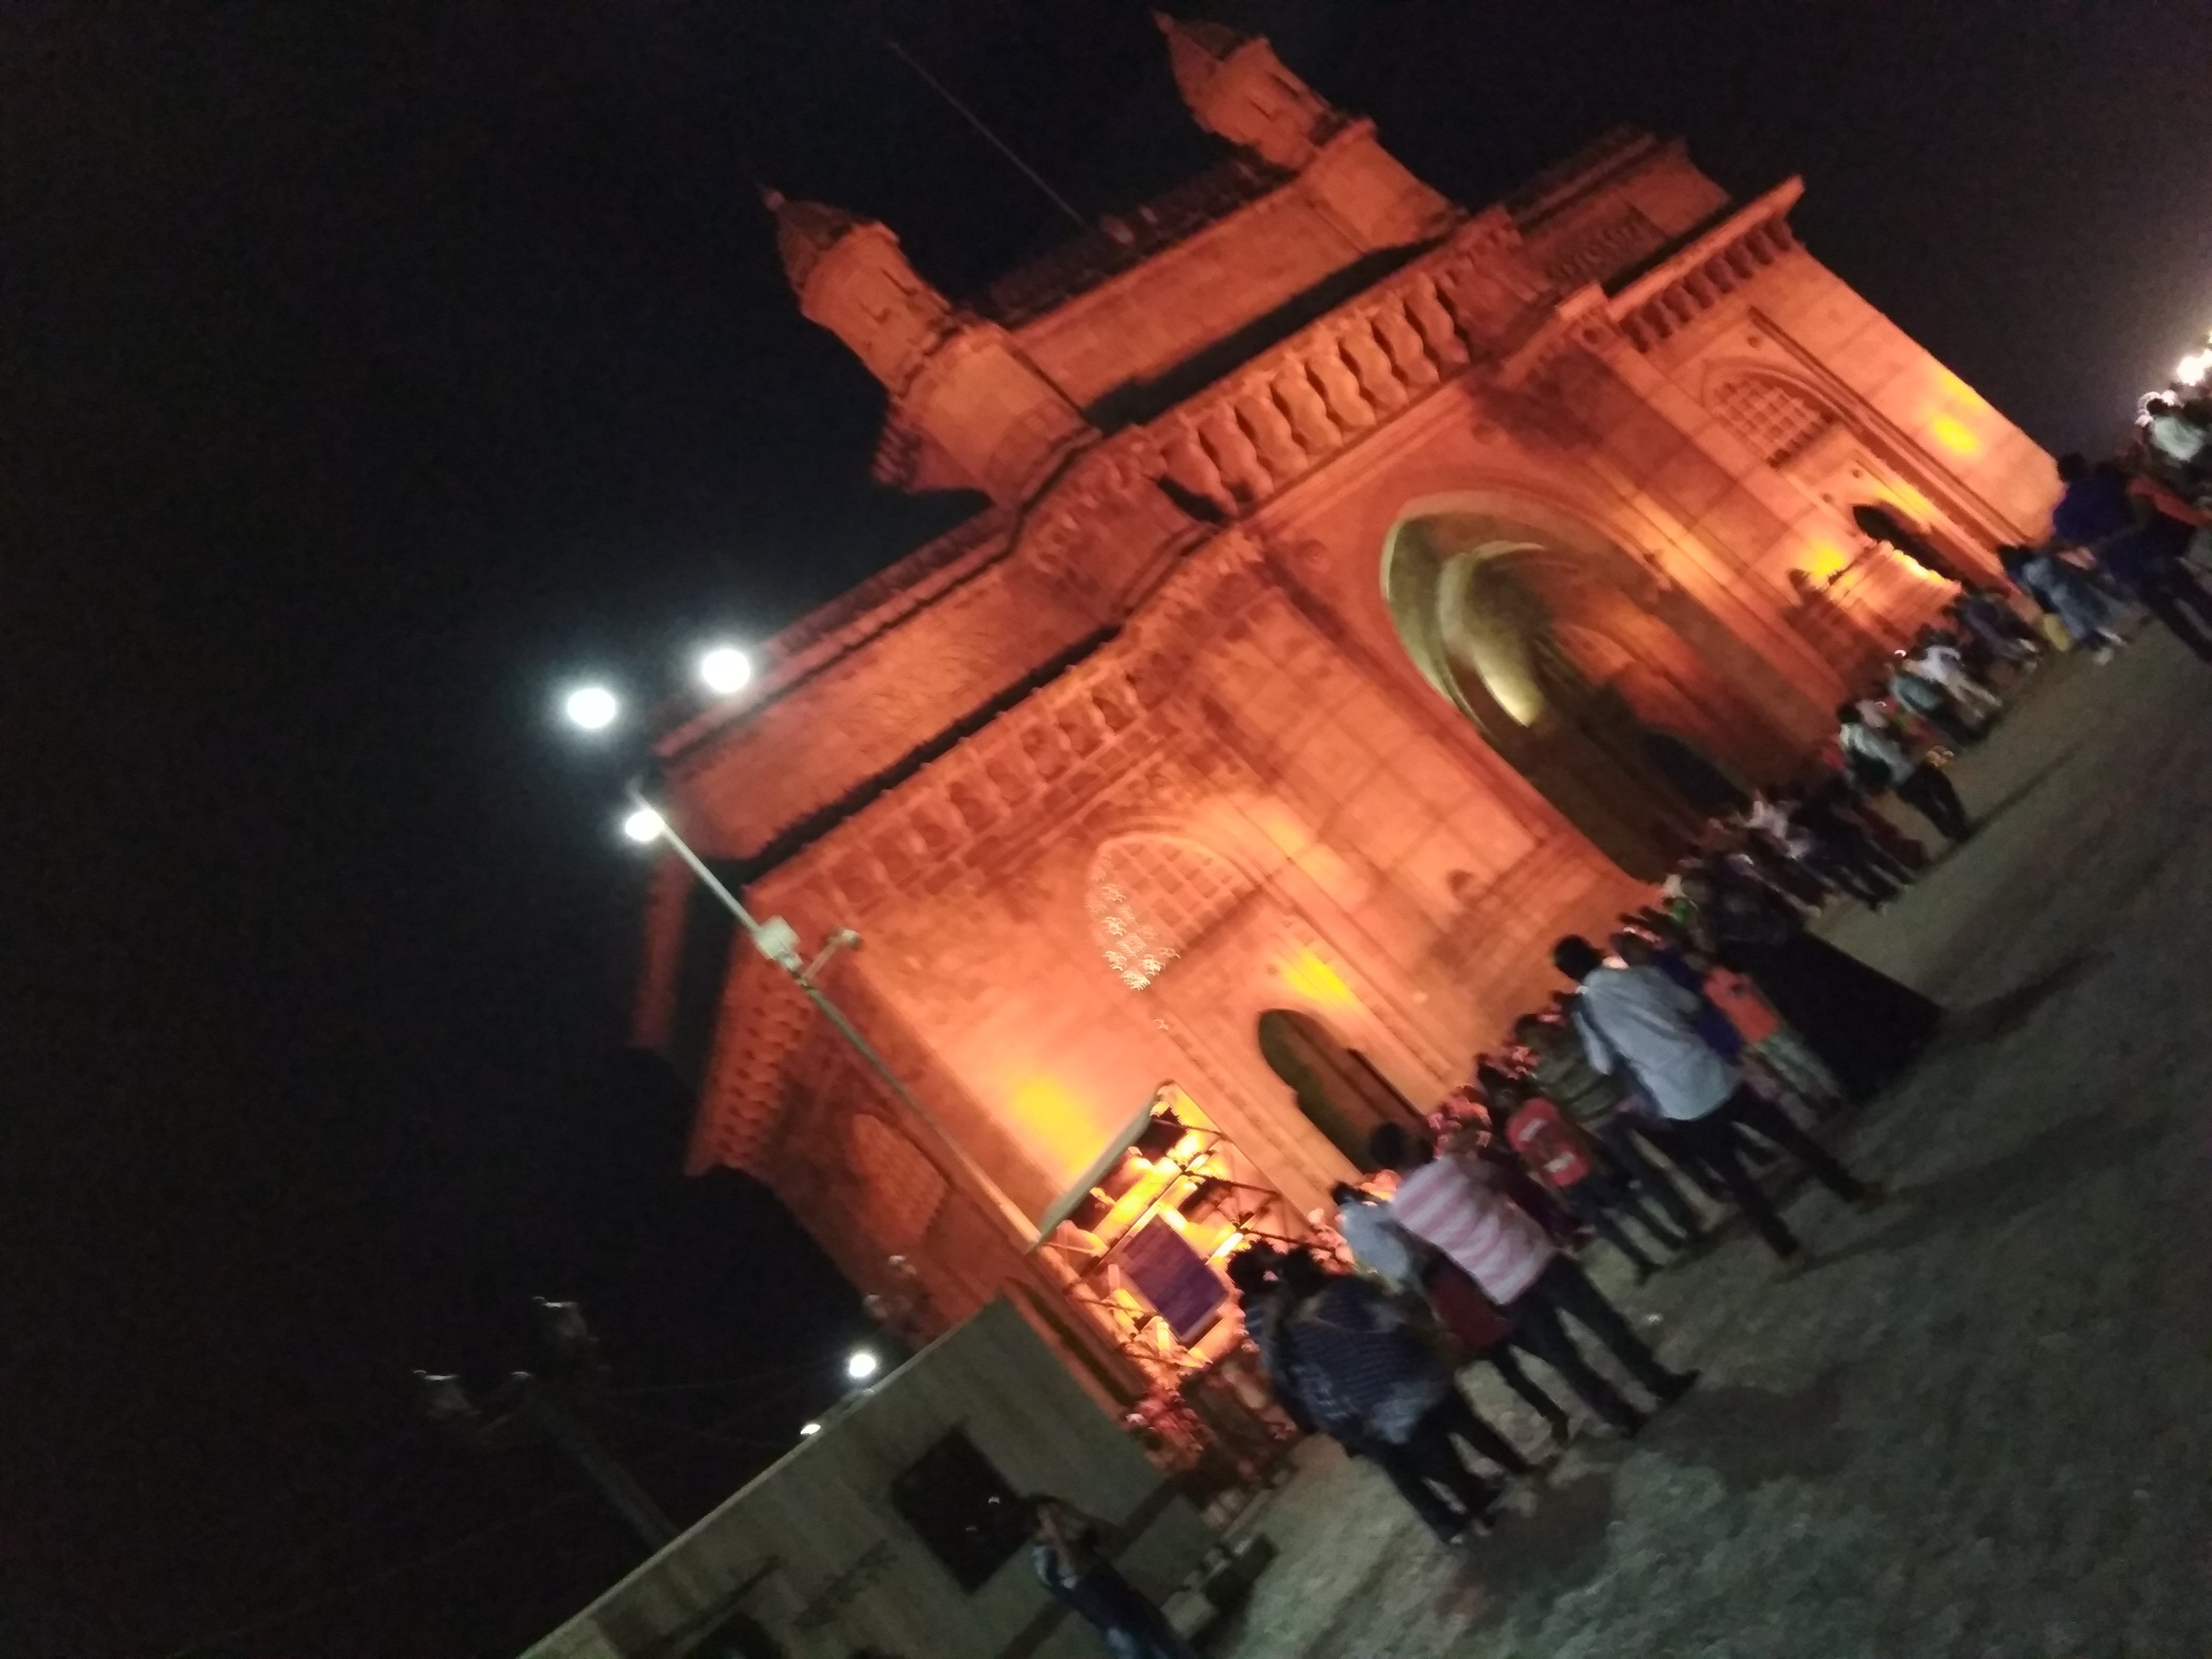 Front view of gate of india